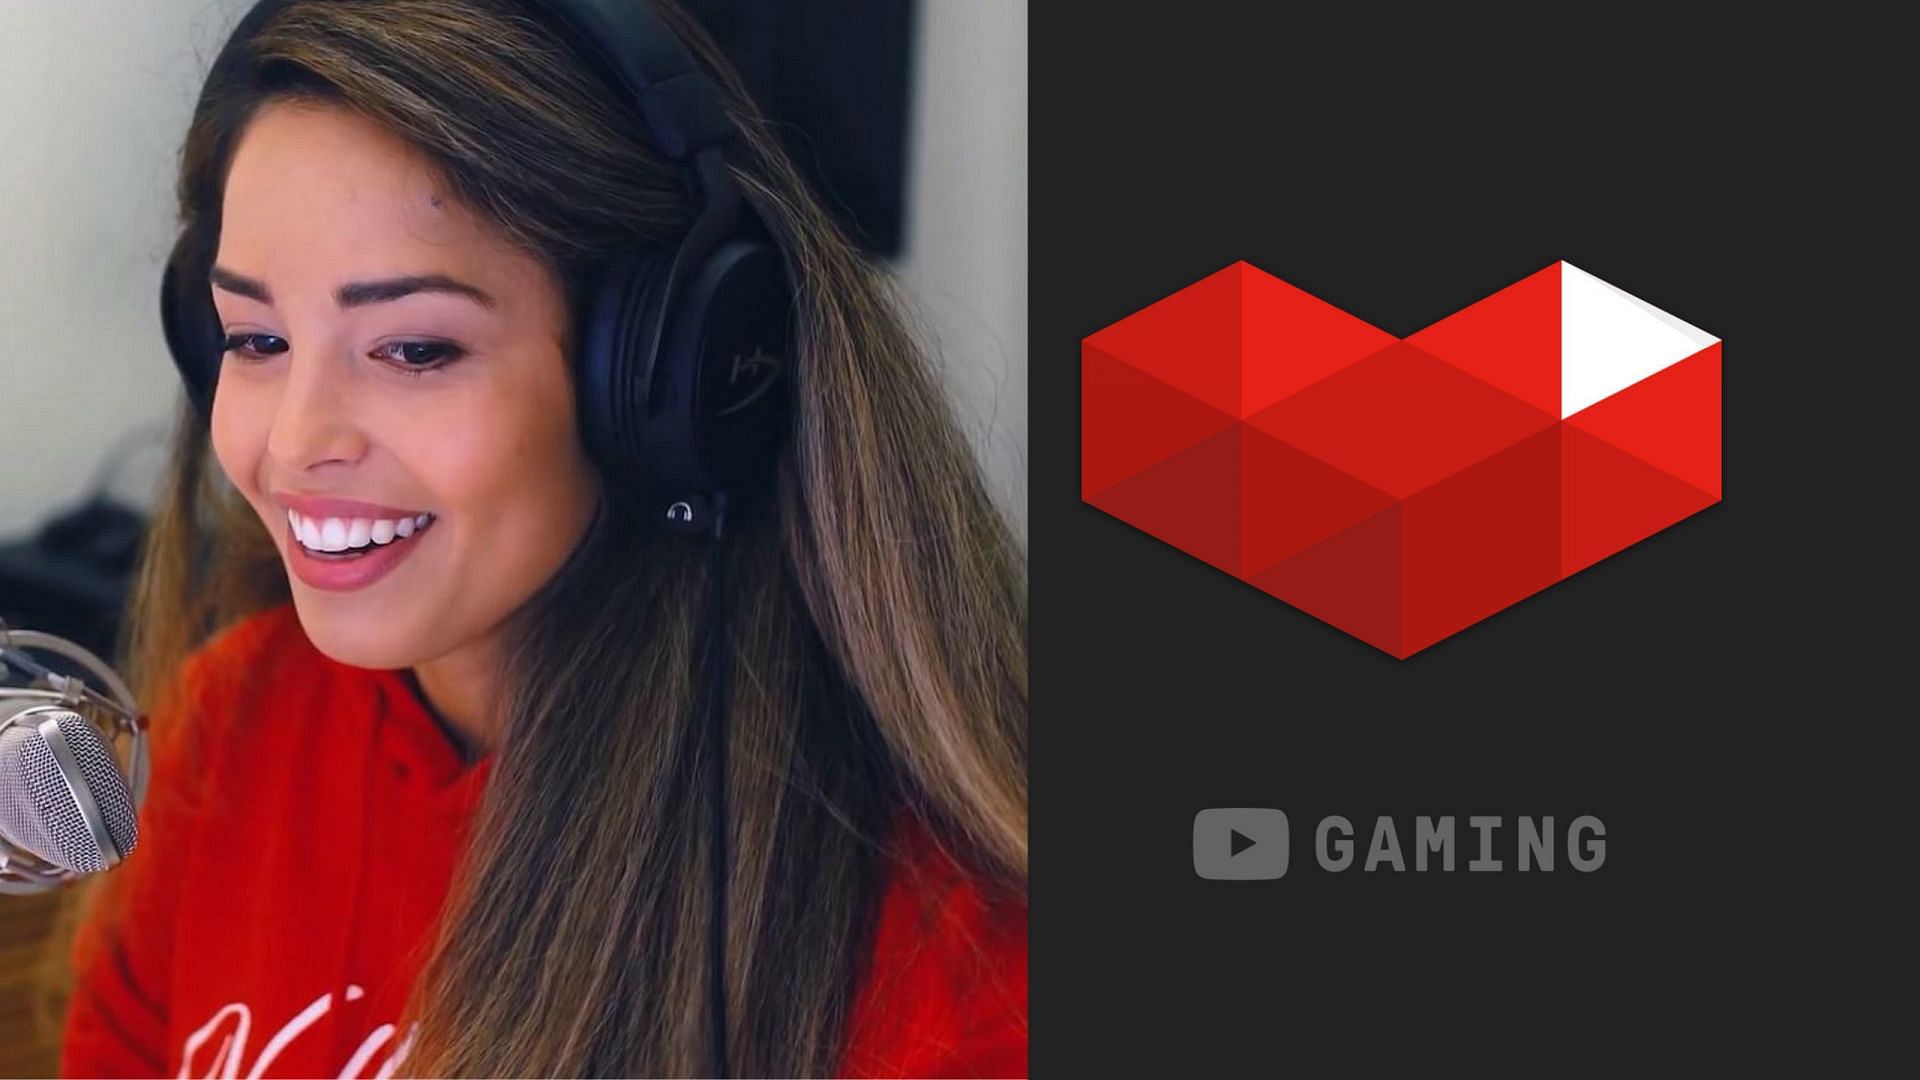 Rae re-signs with YouTube (Images via YouTube/Valkyrae and YouTube)